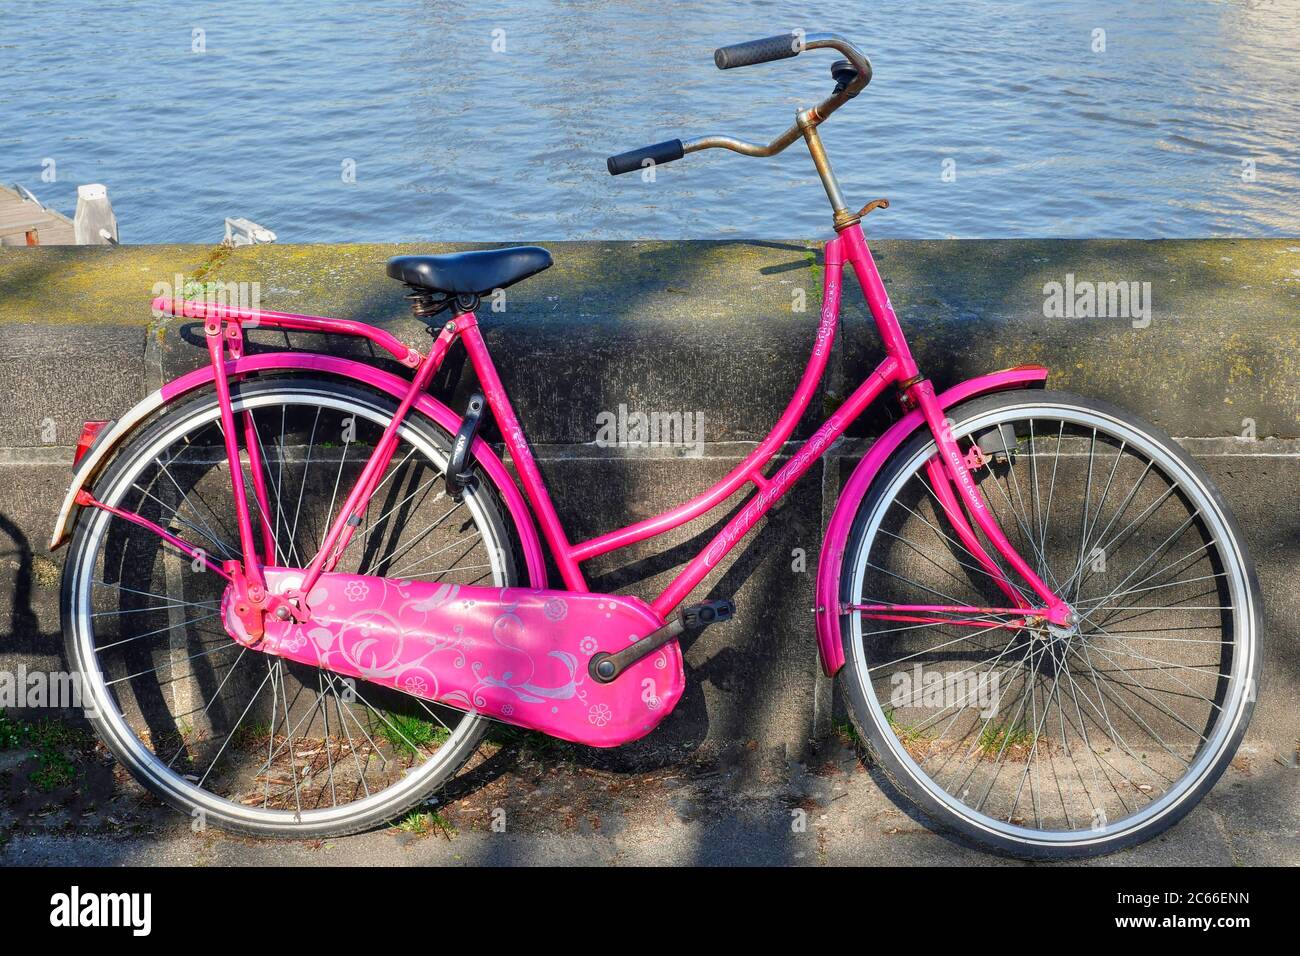 Pink bicycle, Amsterdam, North Holland, Netherlands Stock Photo - Alamy